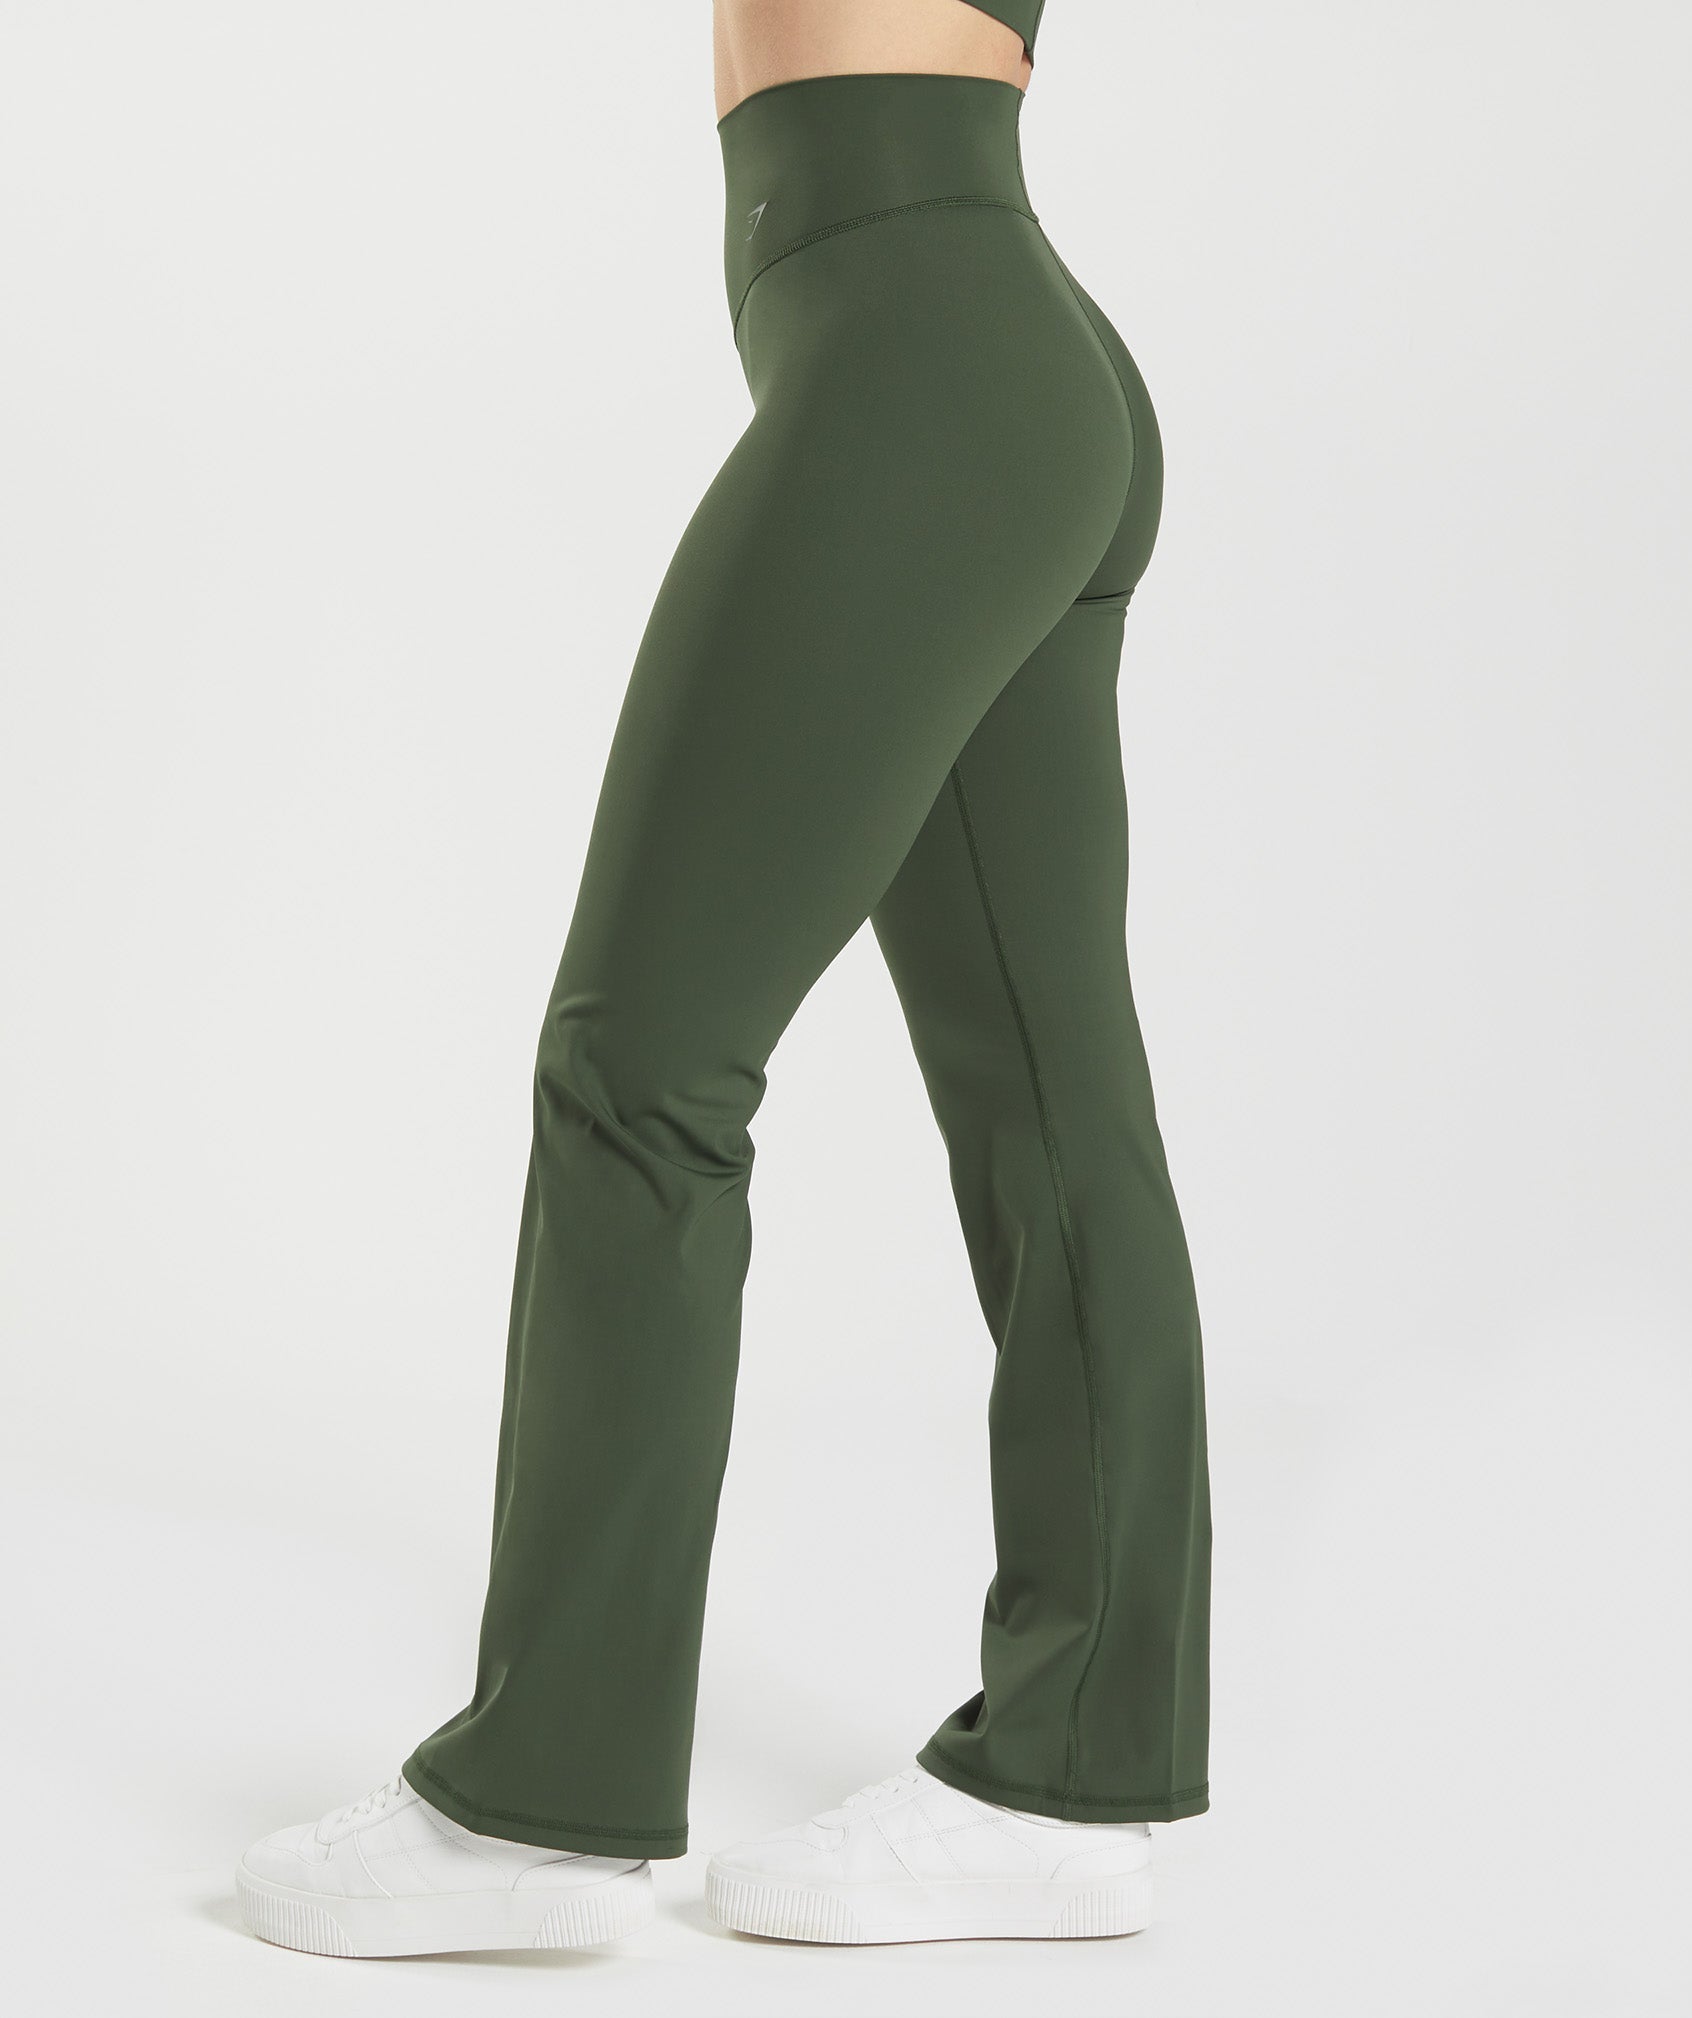 Elevate Flared Leggings in Moss Olive - view 4